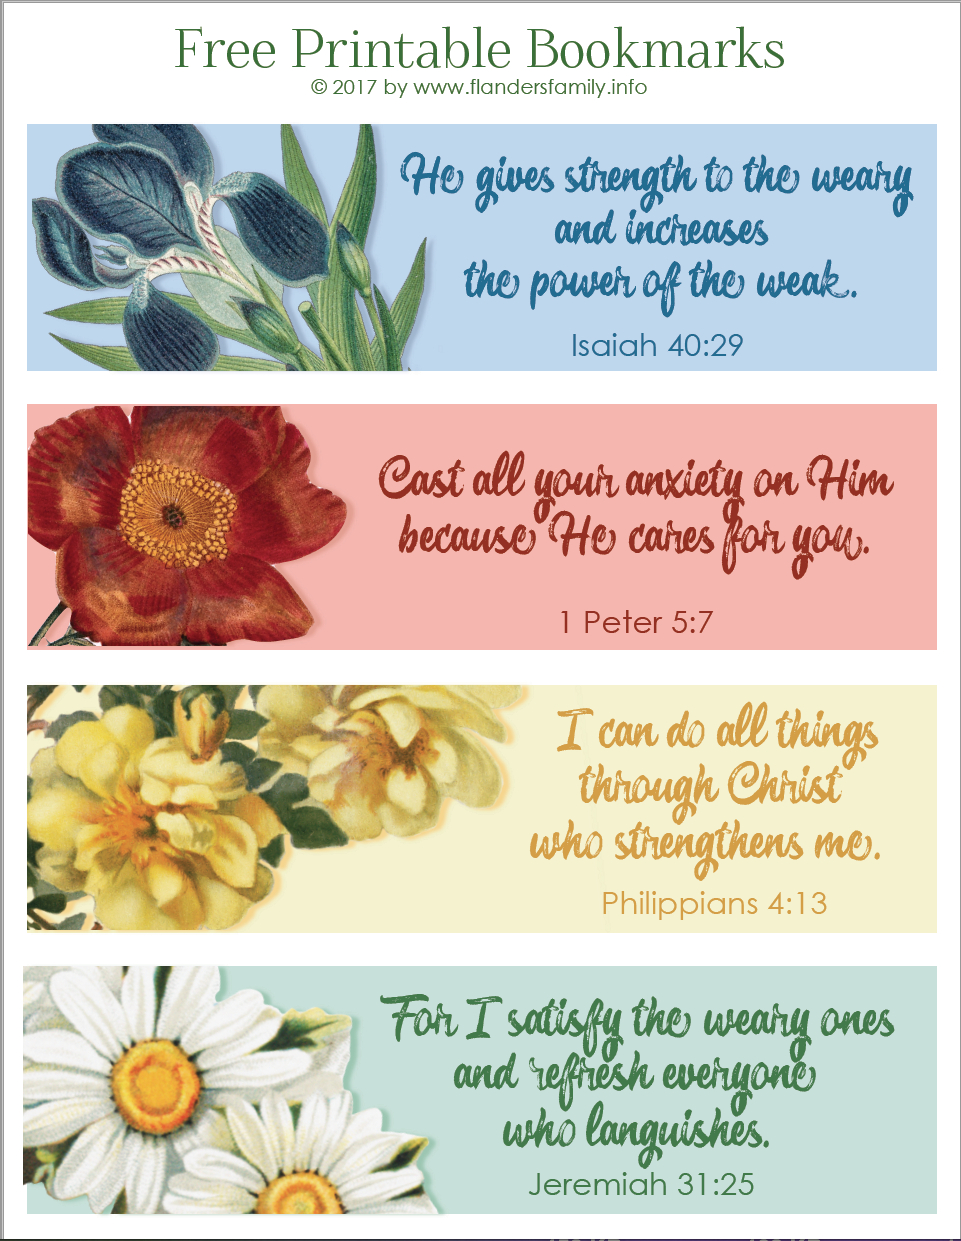 Pretty Printable Scripture Bookmarks - Flanders Family Homelife - Free Printable Bookmarks With Bible Verses